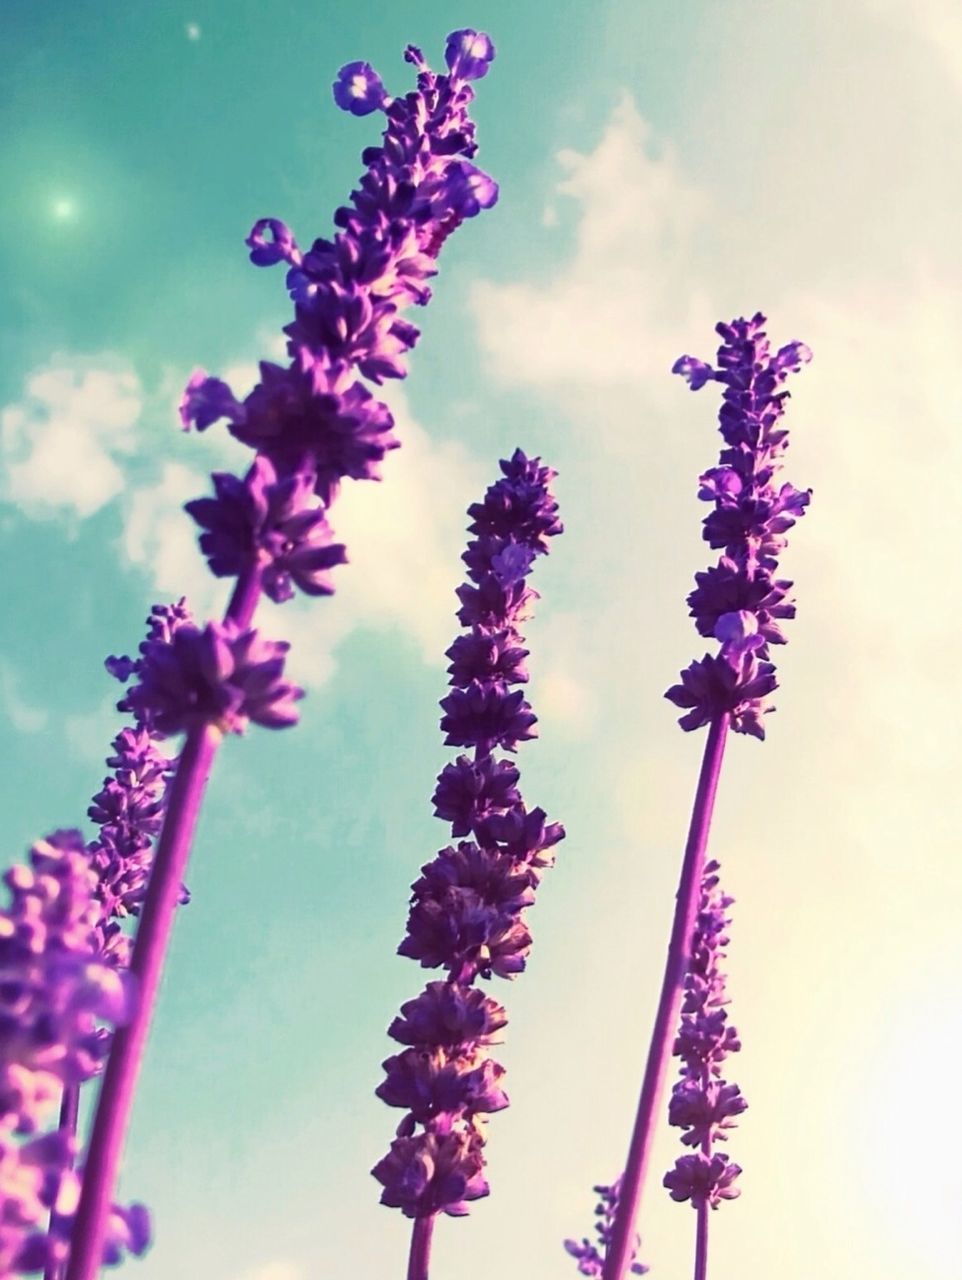 flower, low angle view, sky, purple, freshness, growth, fragility, blue, nature, beauty in nature, stem, pink color, day, focus on foreground, outdoors, close-up, no people, cloud - sky, plant, blooming